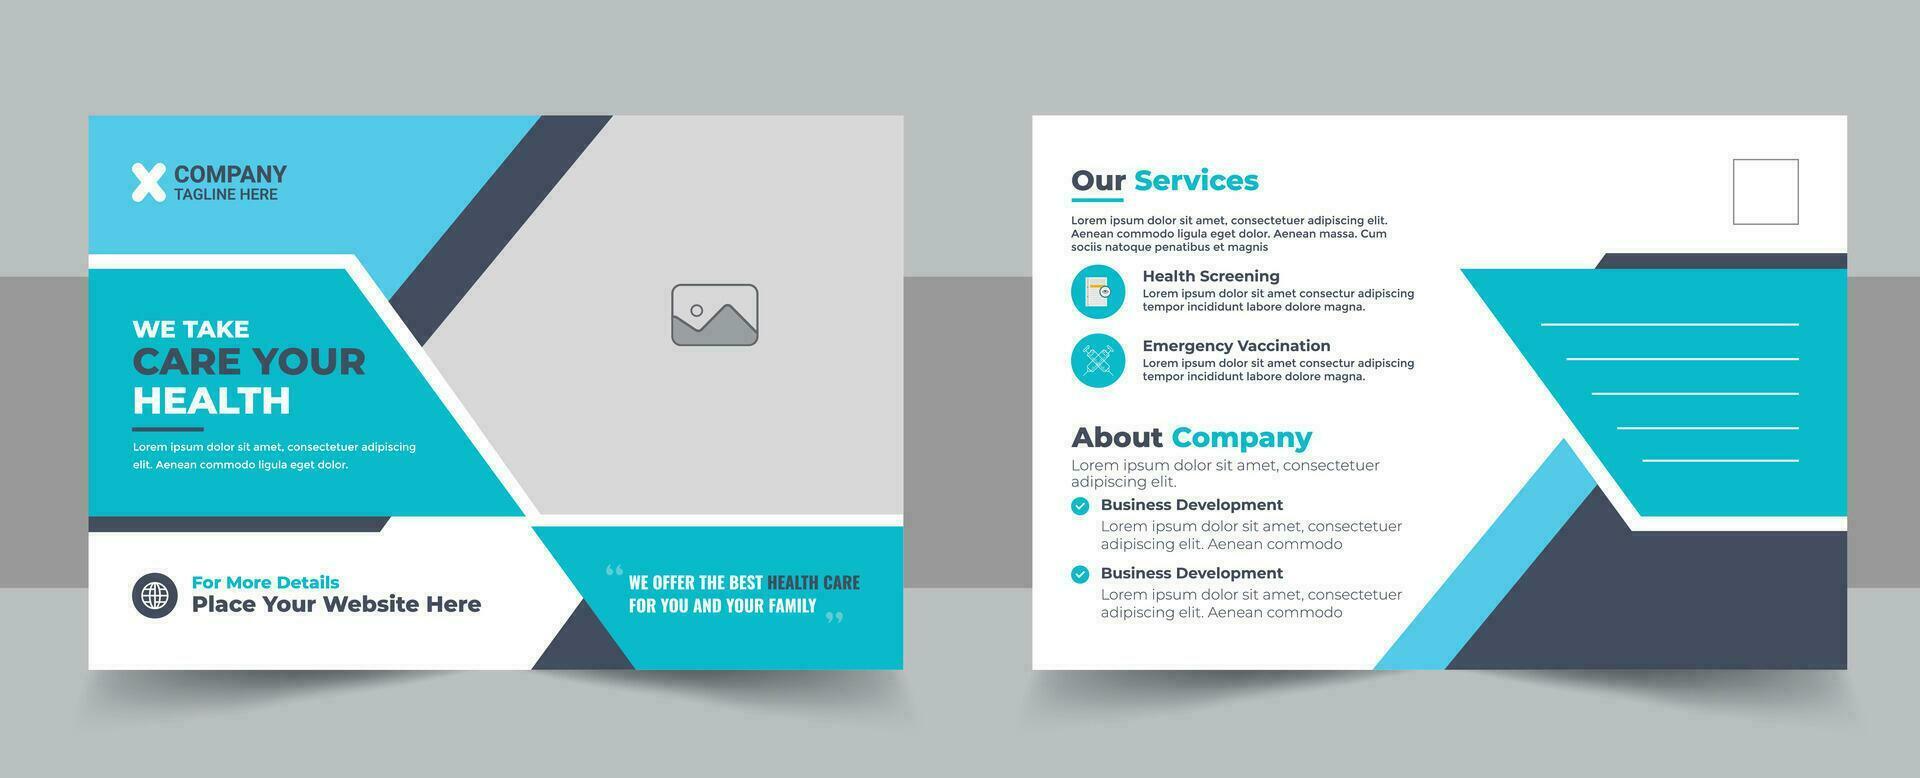 New Medical healthcare postcard design template for other company business purposes vector